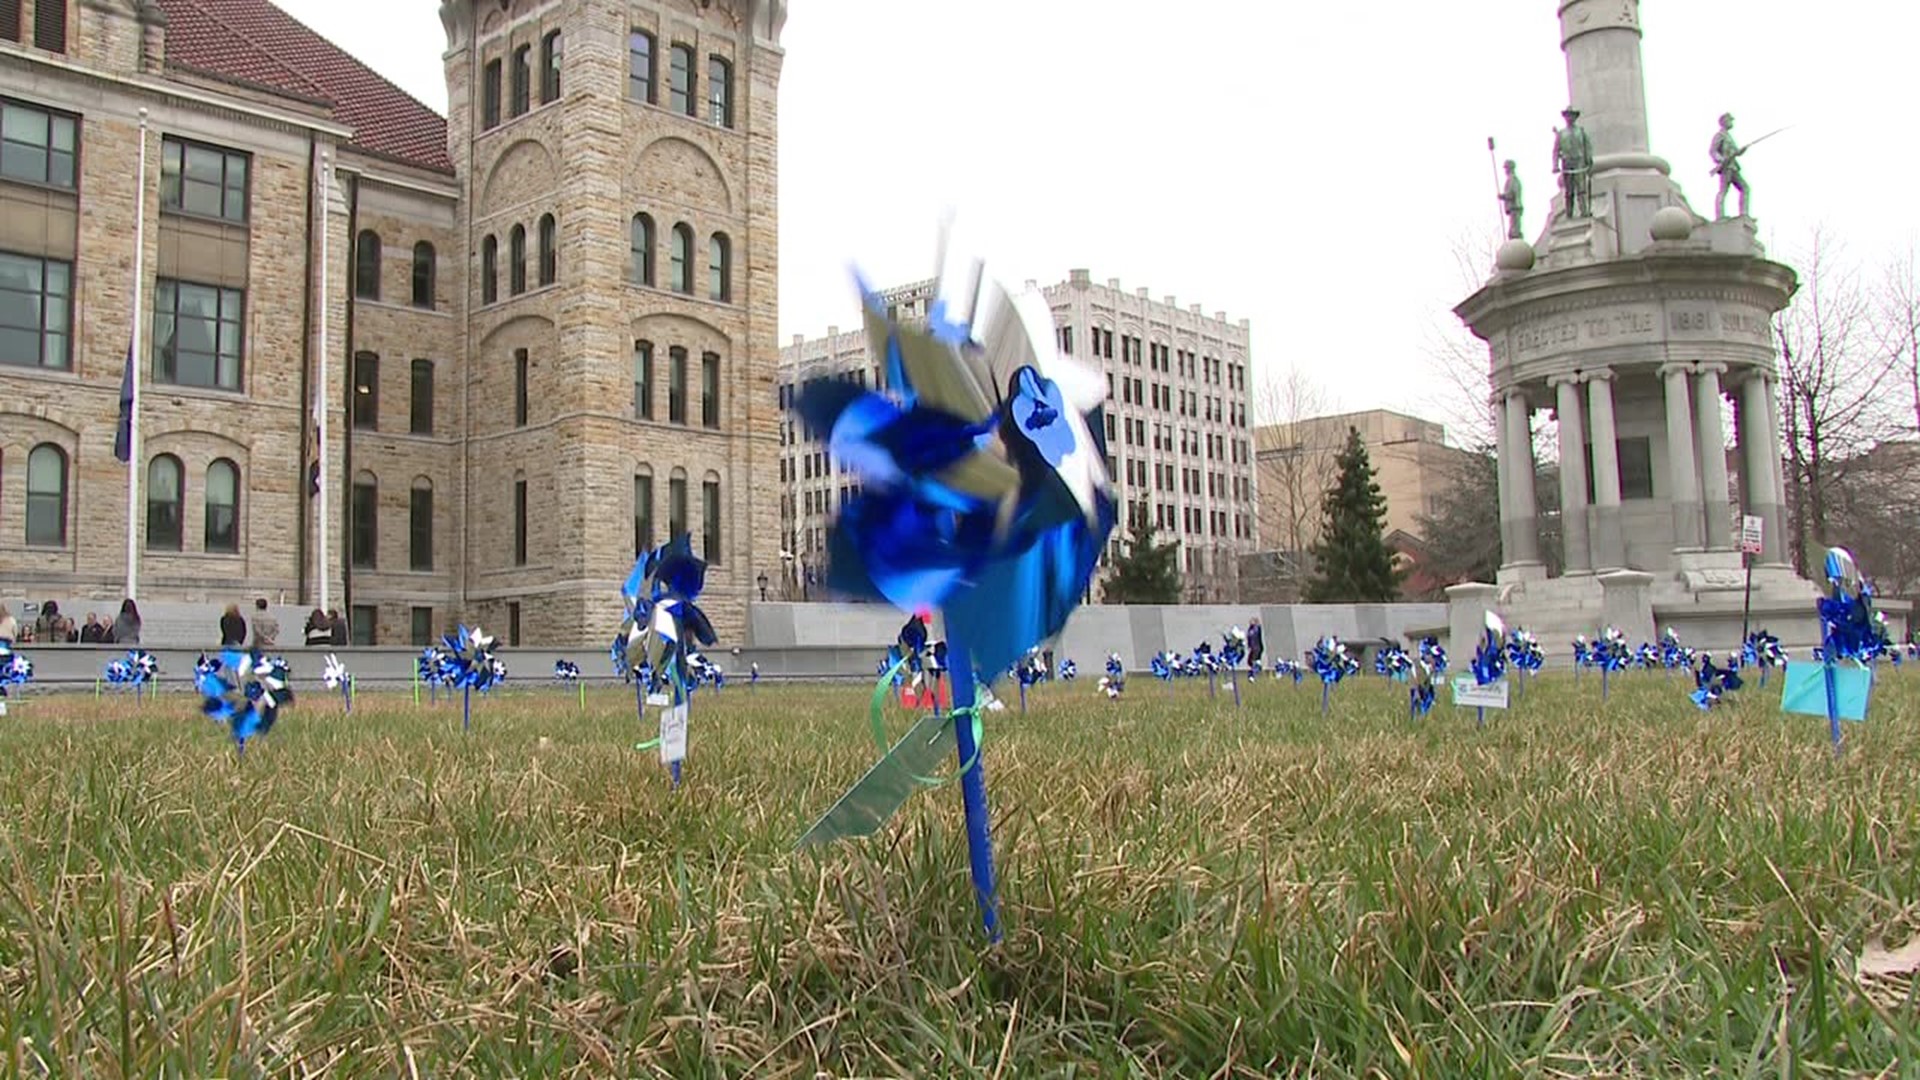 The Children's Advocacy Center of NEPA planted more than 500 pinwheels on the lawn of the Lackawanna County Courthouse.